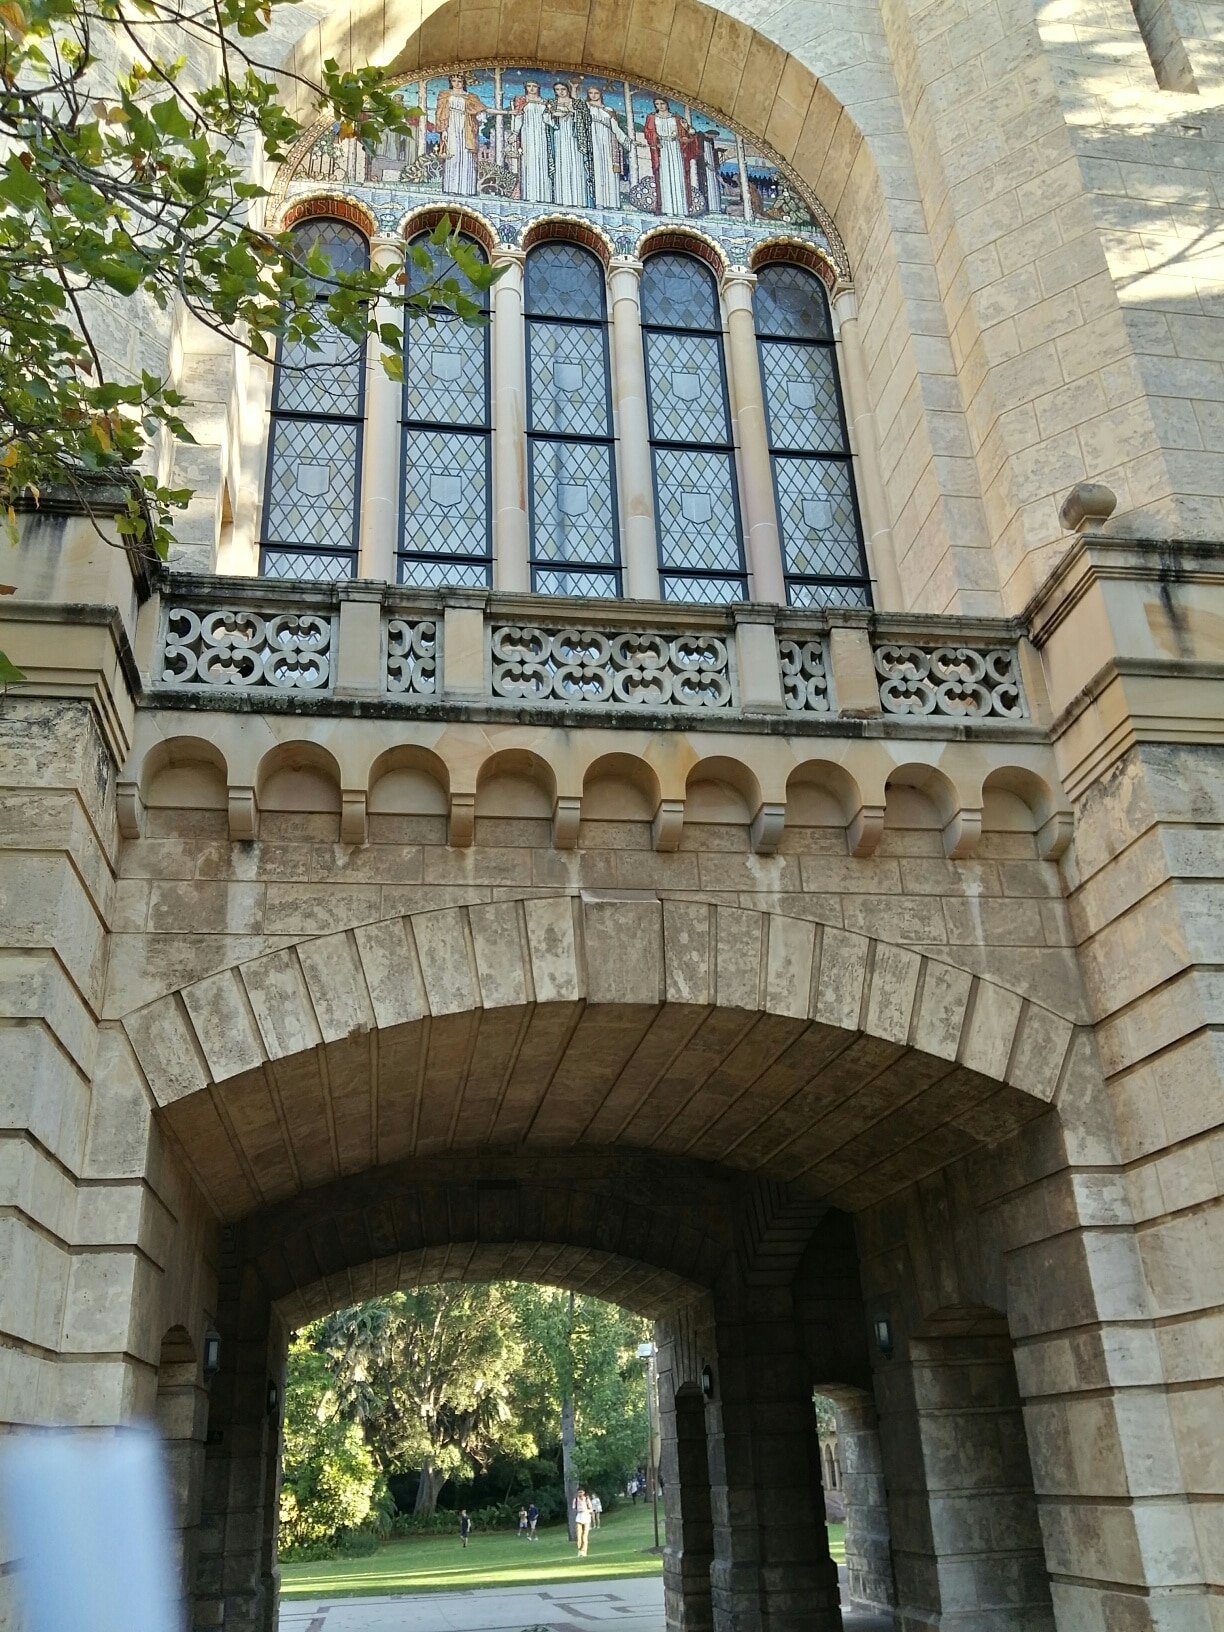 A very European archway at the University of Western Australia, with very Australian bushes beyond!